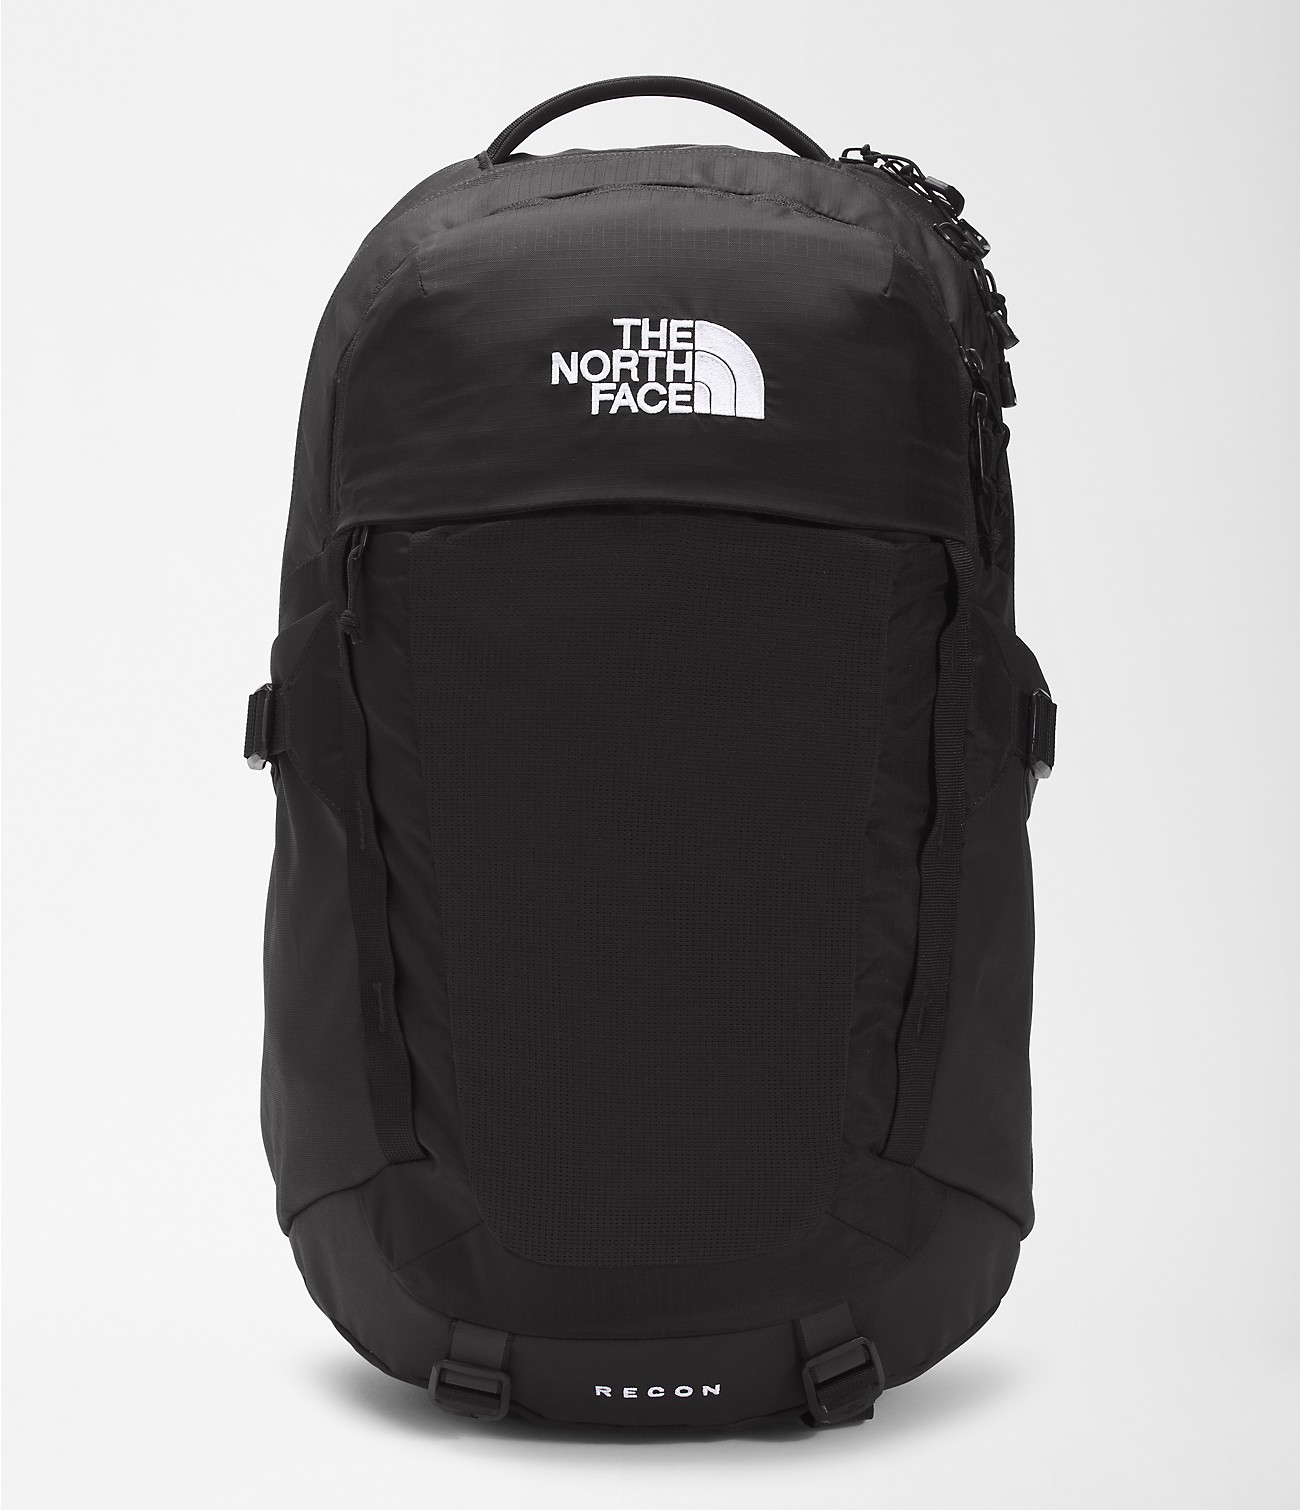 Unlock Wilderness' choice in the Lululemon Vs North Face comparison, the Recon Backpack by The North Face